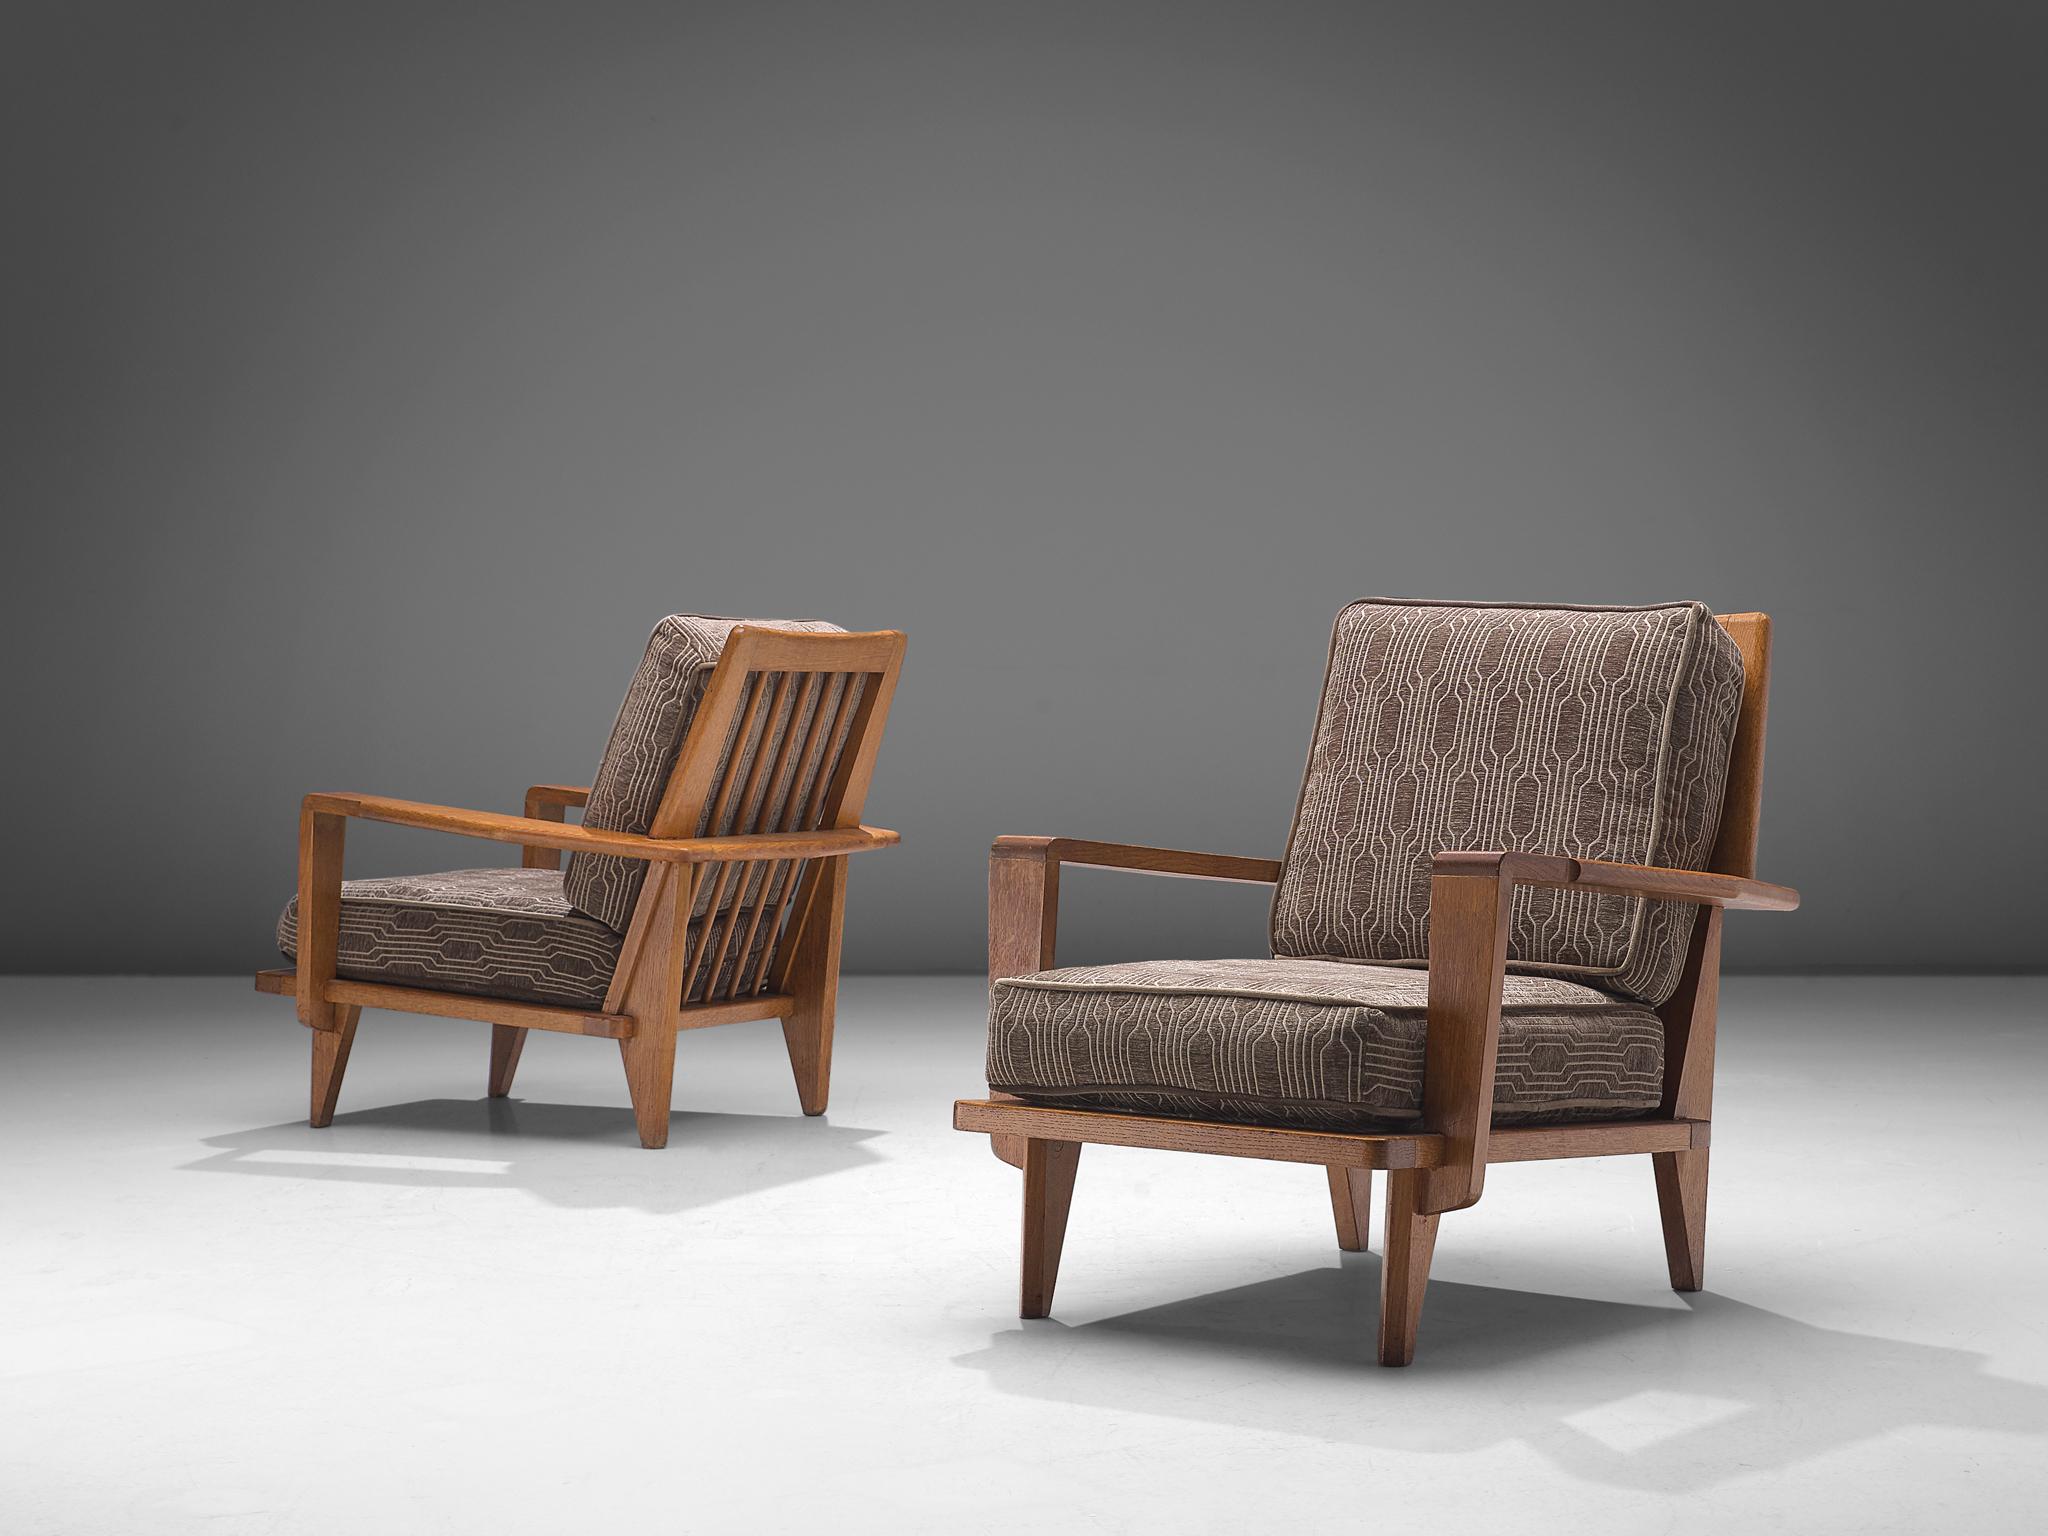 Guillerme et Chambron, easy chairs, fabric and oak, France, 1950s

This sculptural set of easy chairs by Guillerme and Chambron is very well executed and made out of solid, carved oak. The back features an interesting open construction with vertical